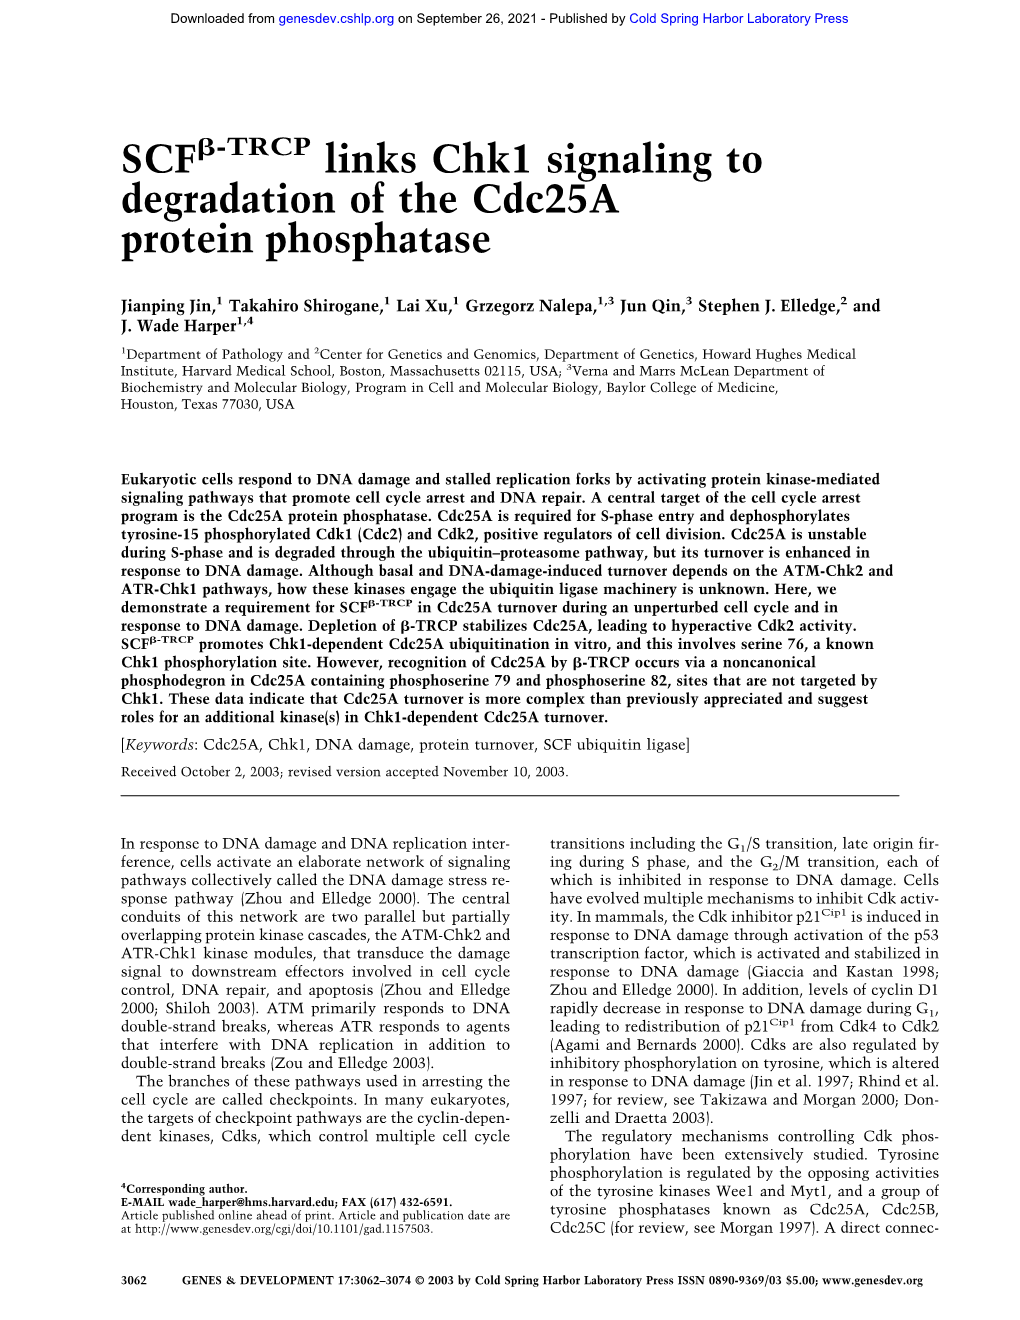 SCF Links Chk1 Signaling to Degradation of the Cdc25a Protein